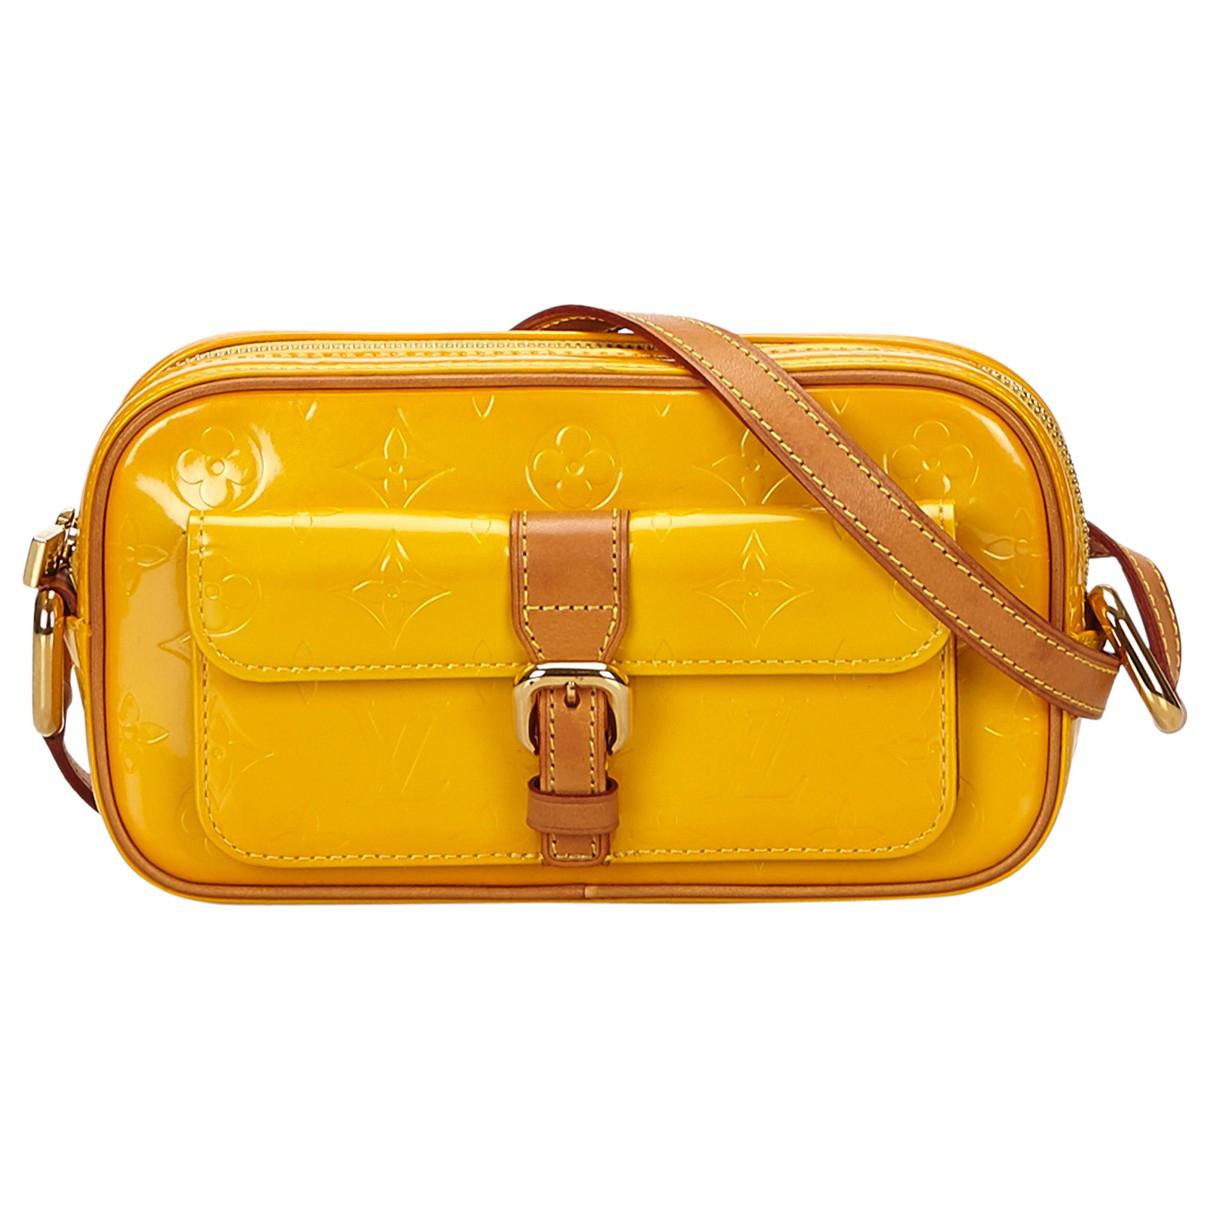 Lyst - Louis Vuitton Patent Leather Handbag in Yellow